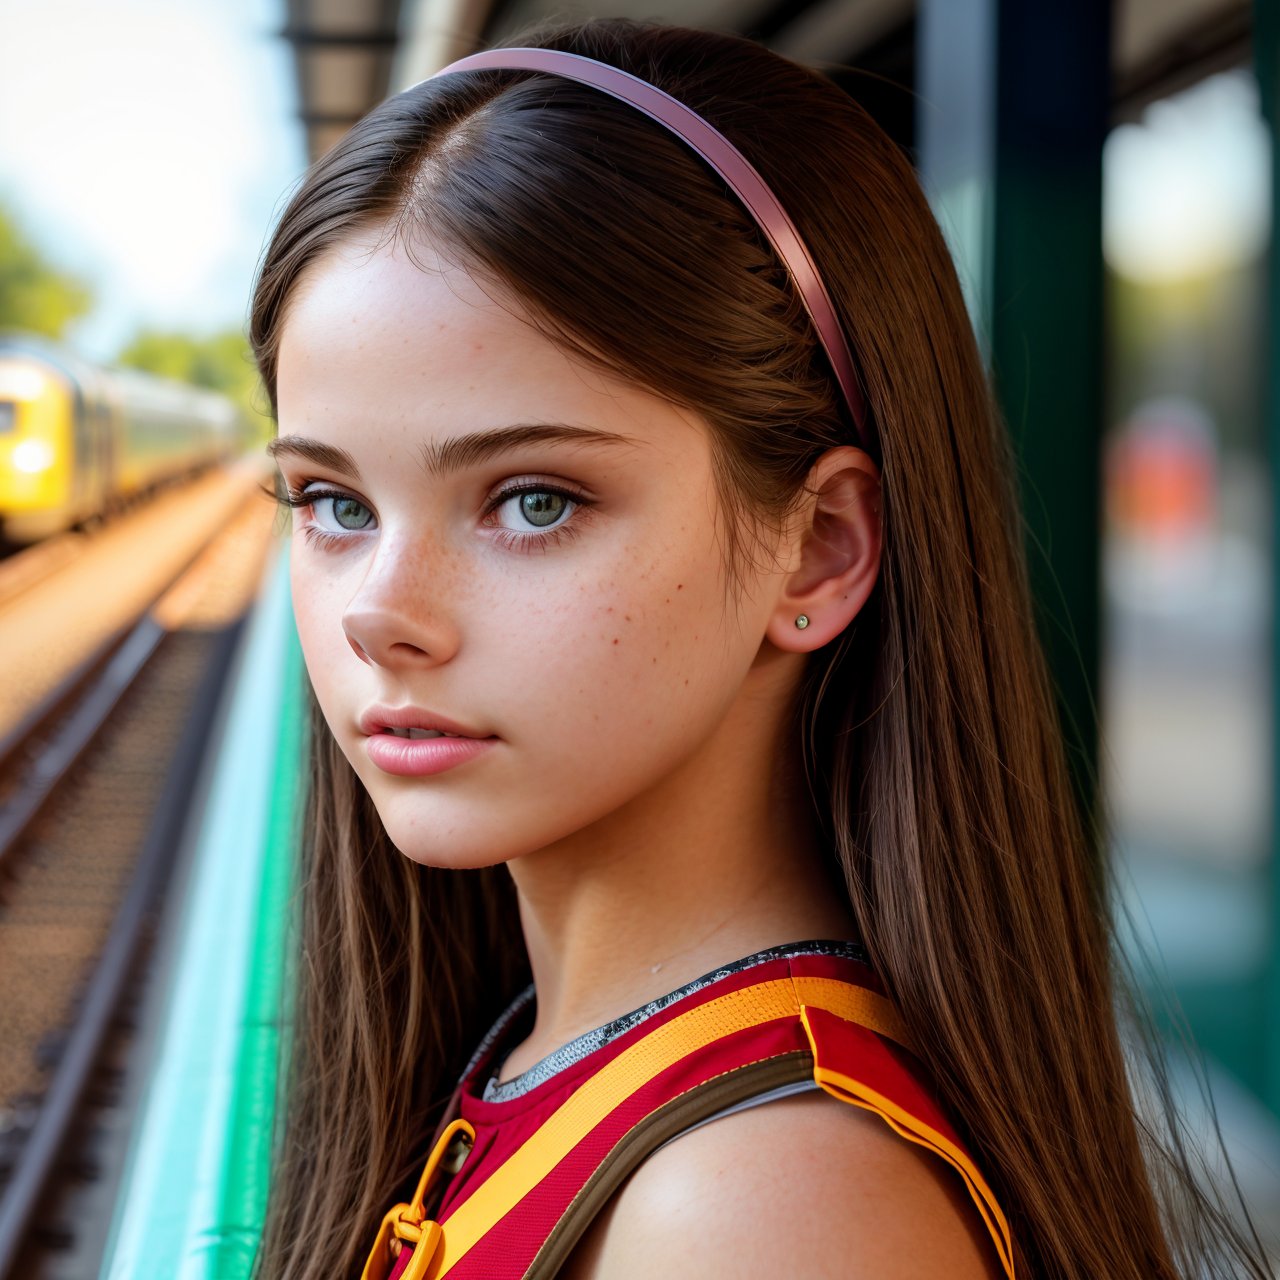 (masterpiece:1.3), best quality, close up portrait of charming (AIDA_LoRA_MeW2016:1.02) <lora:AIDA_LoRA_MeW2016:0.9> in a schoolgirl outfit waiting a train on the station, outdoors, little girl, pretty face, parted lips, cinematic, composition, studio photo, studio photo, kkw-ph1, hdr, f1.6, getty images, (colorful:1.1)